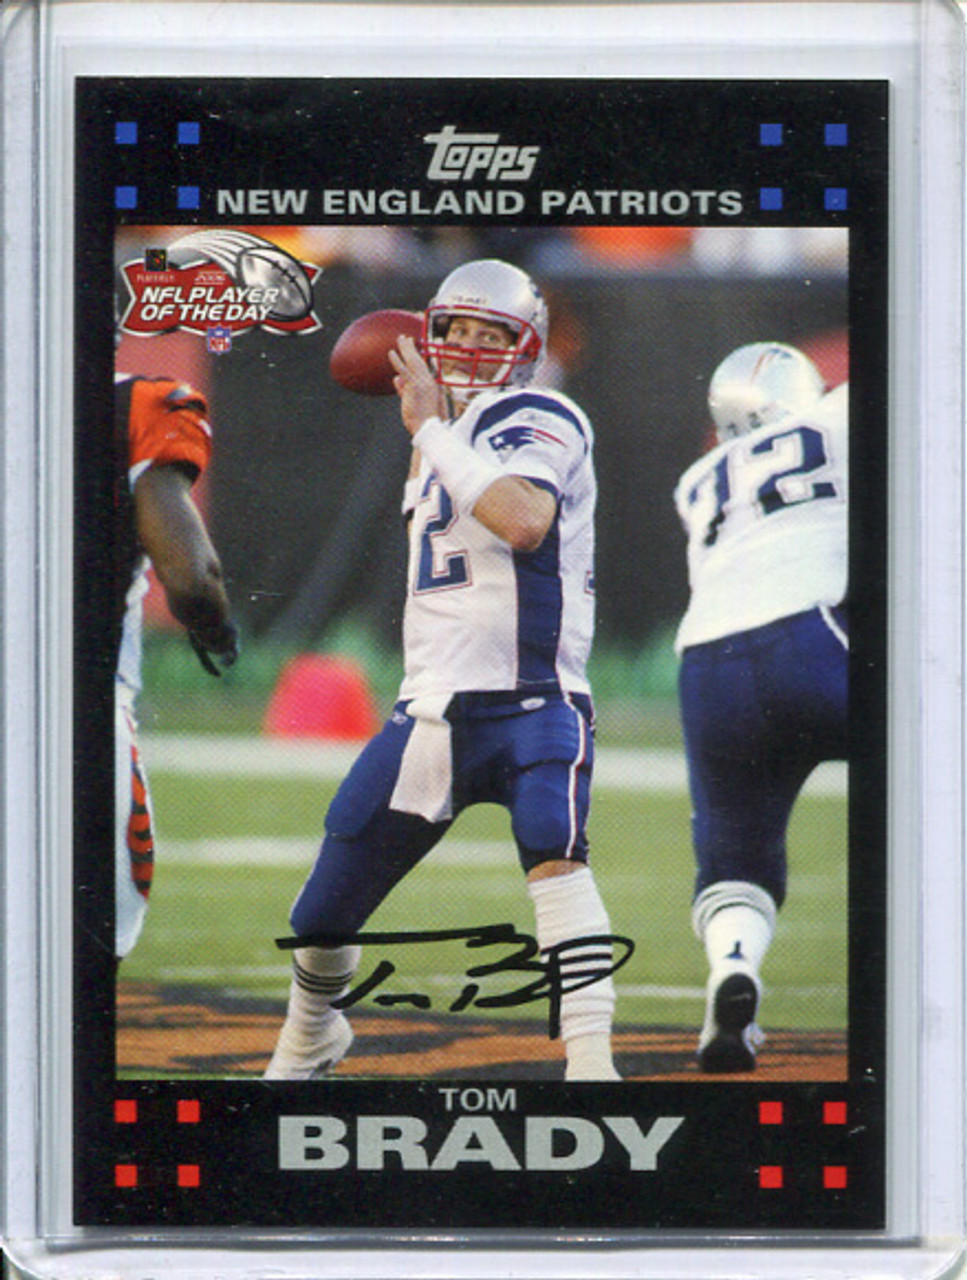 Tom Brady 2007 Topps, NFL Player of the Day #28